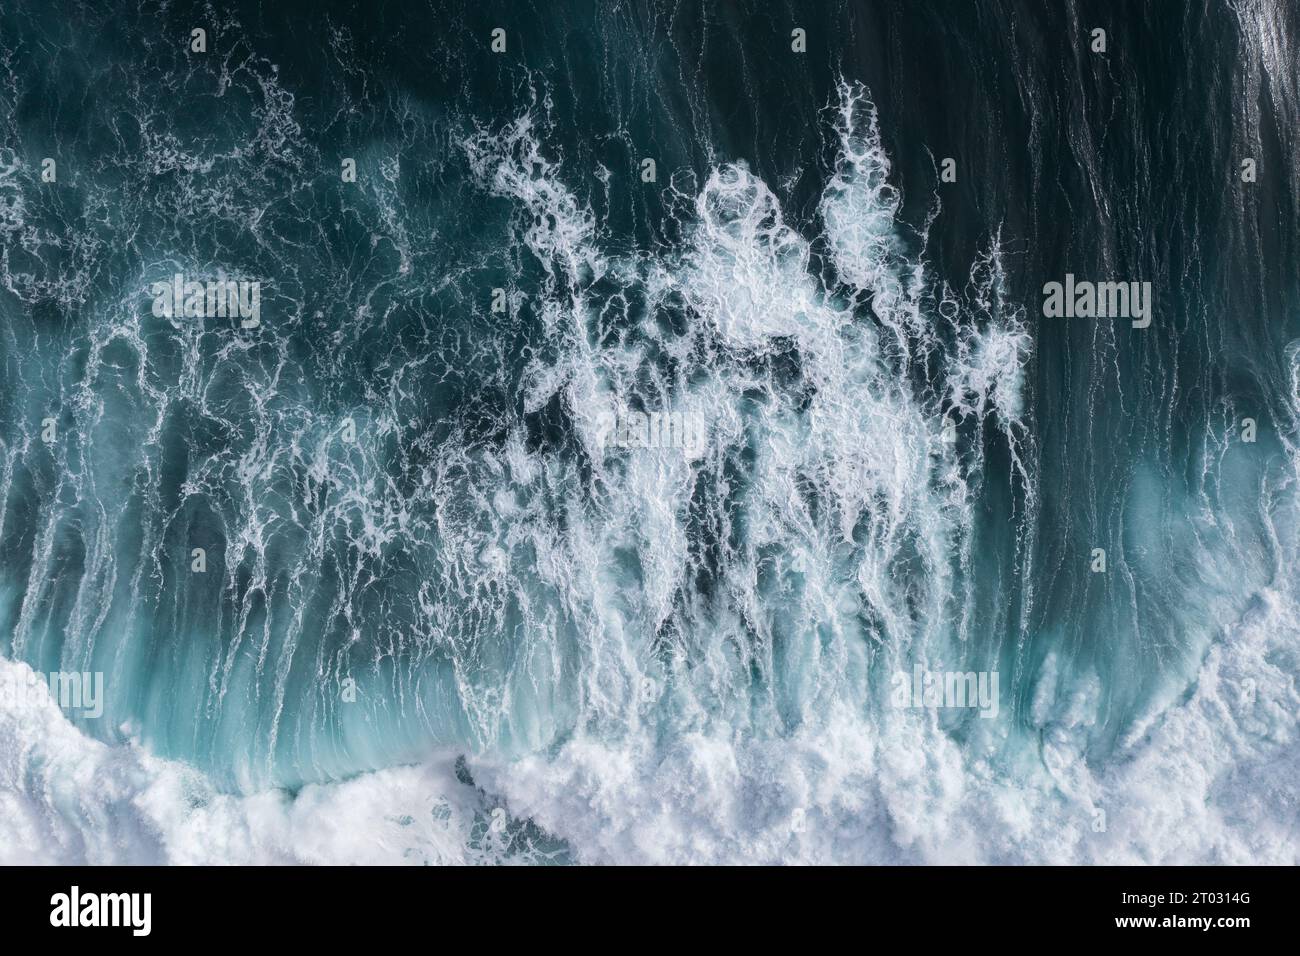 Perfect waves for surfing. The waves splash into the turquoise water off the coast. Stock Photo